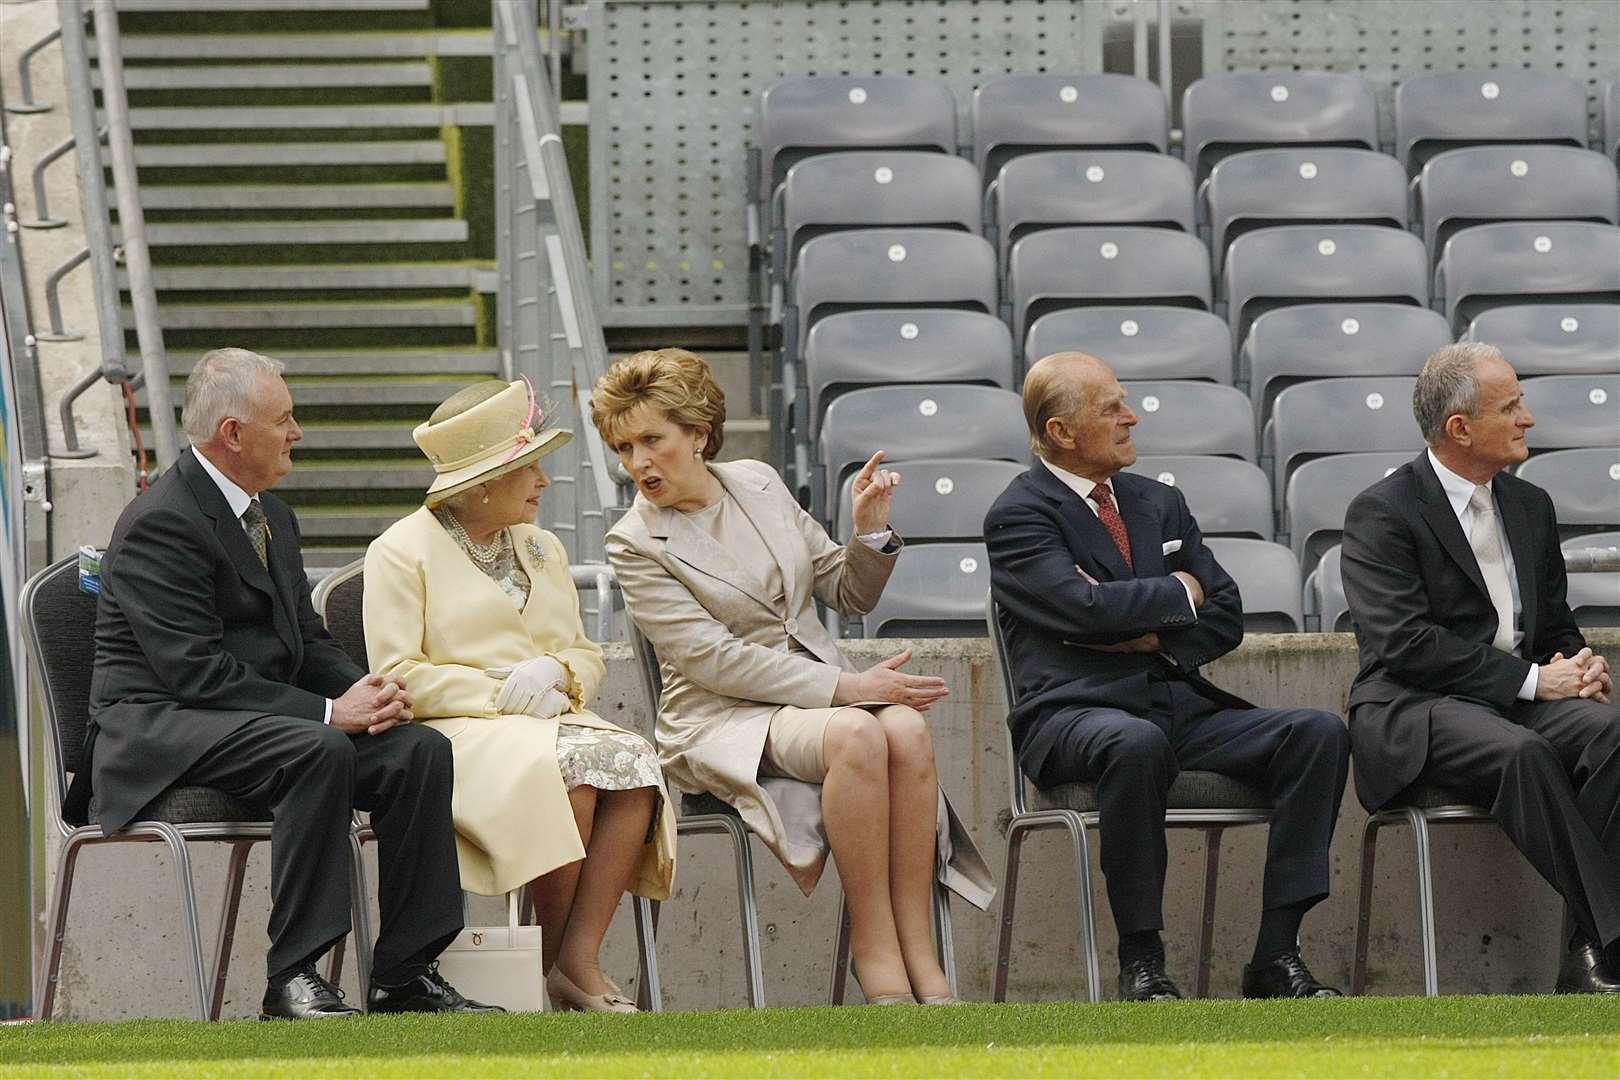 Former GAA President Christy Cooney, then President of the Irish Republic Mary McAleese, Queen Elizabeth II, the Duke of Edinburgh and Dr Martin McAleese watch a video about Gaelic football at Croke Park (Julien Behal/PA Wire)